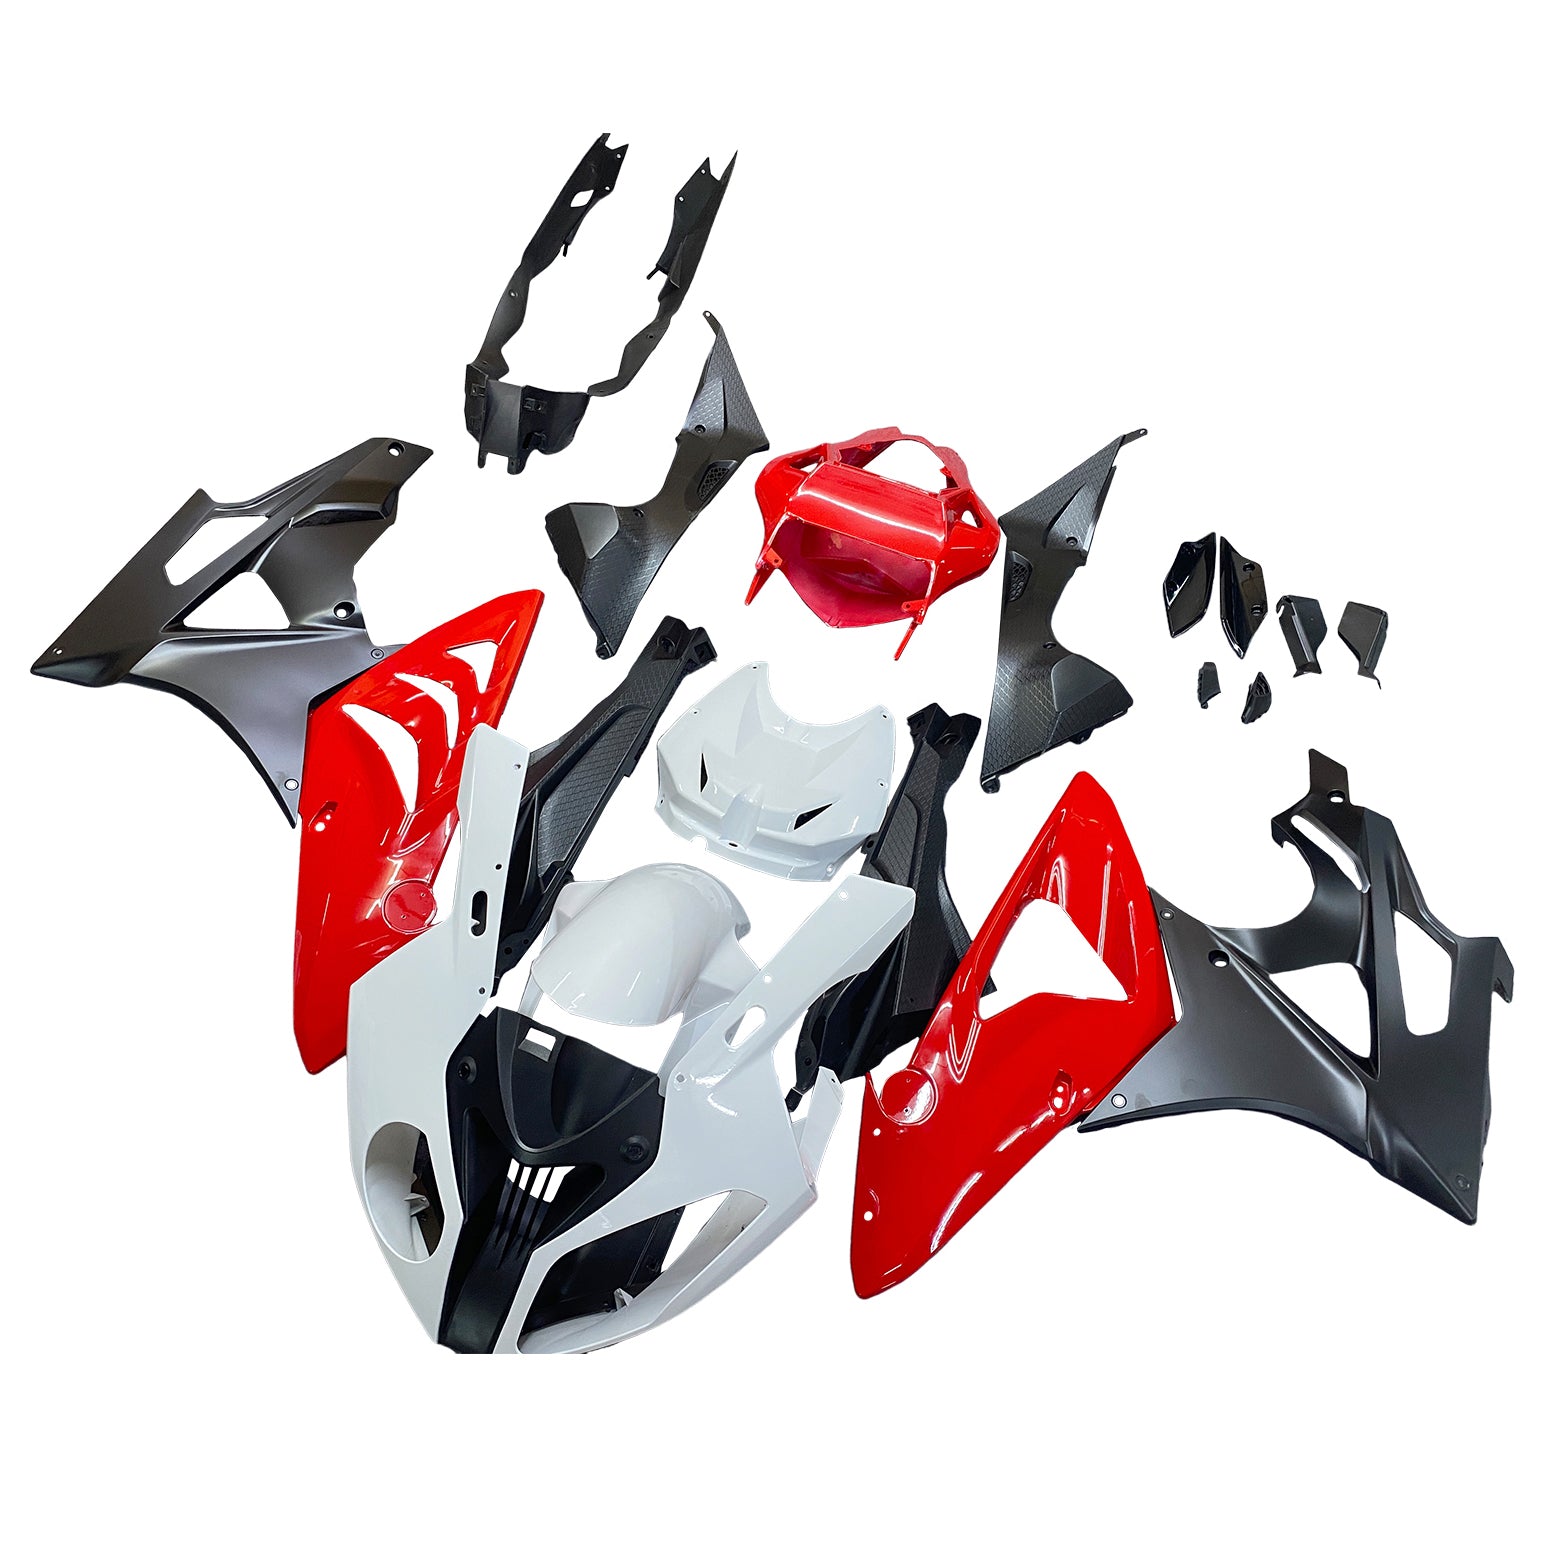 Amotopart Kit carena BMW S1000RR 2009-2014 Style5 bianco e rosso